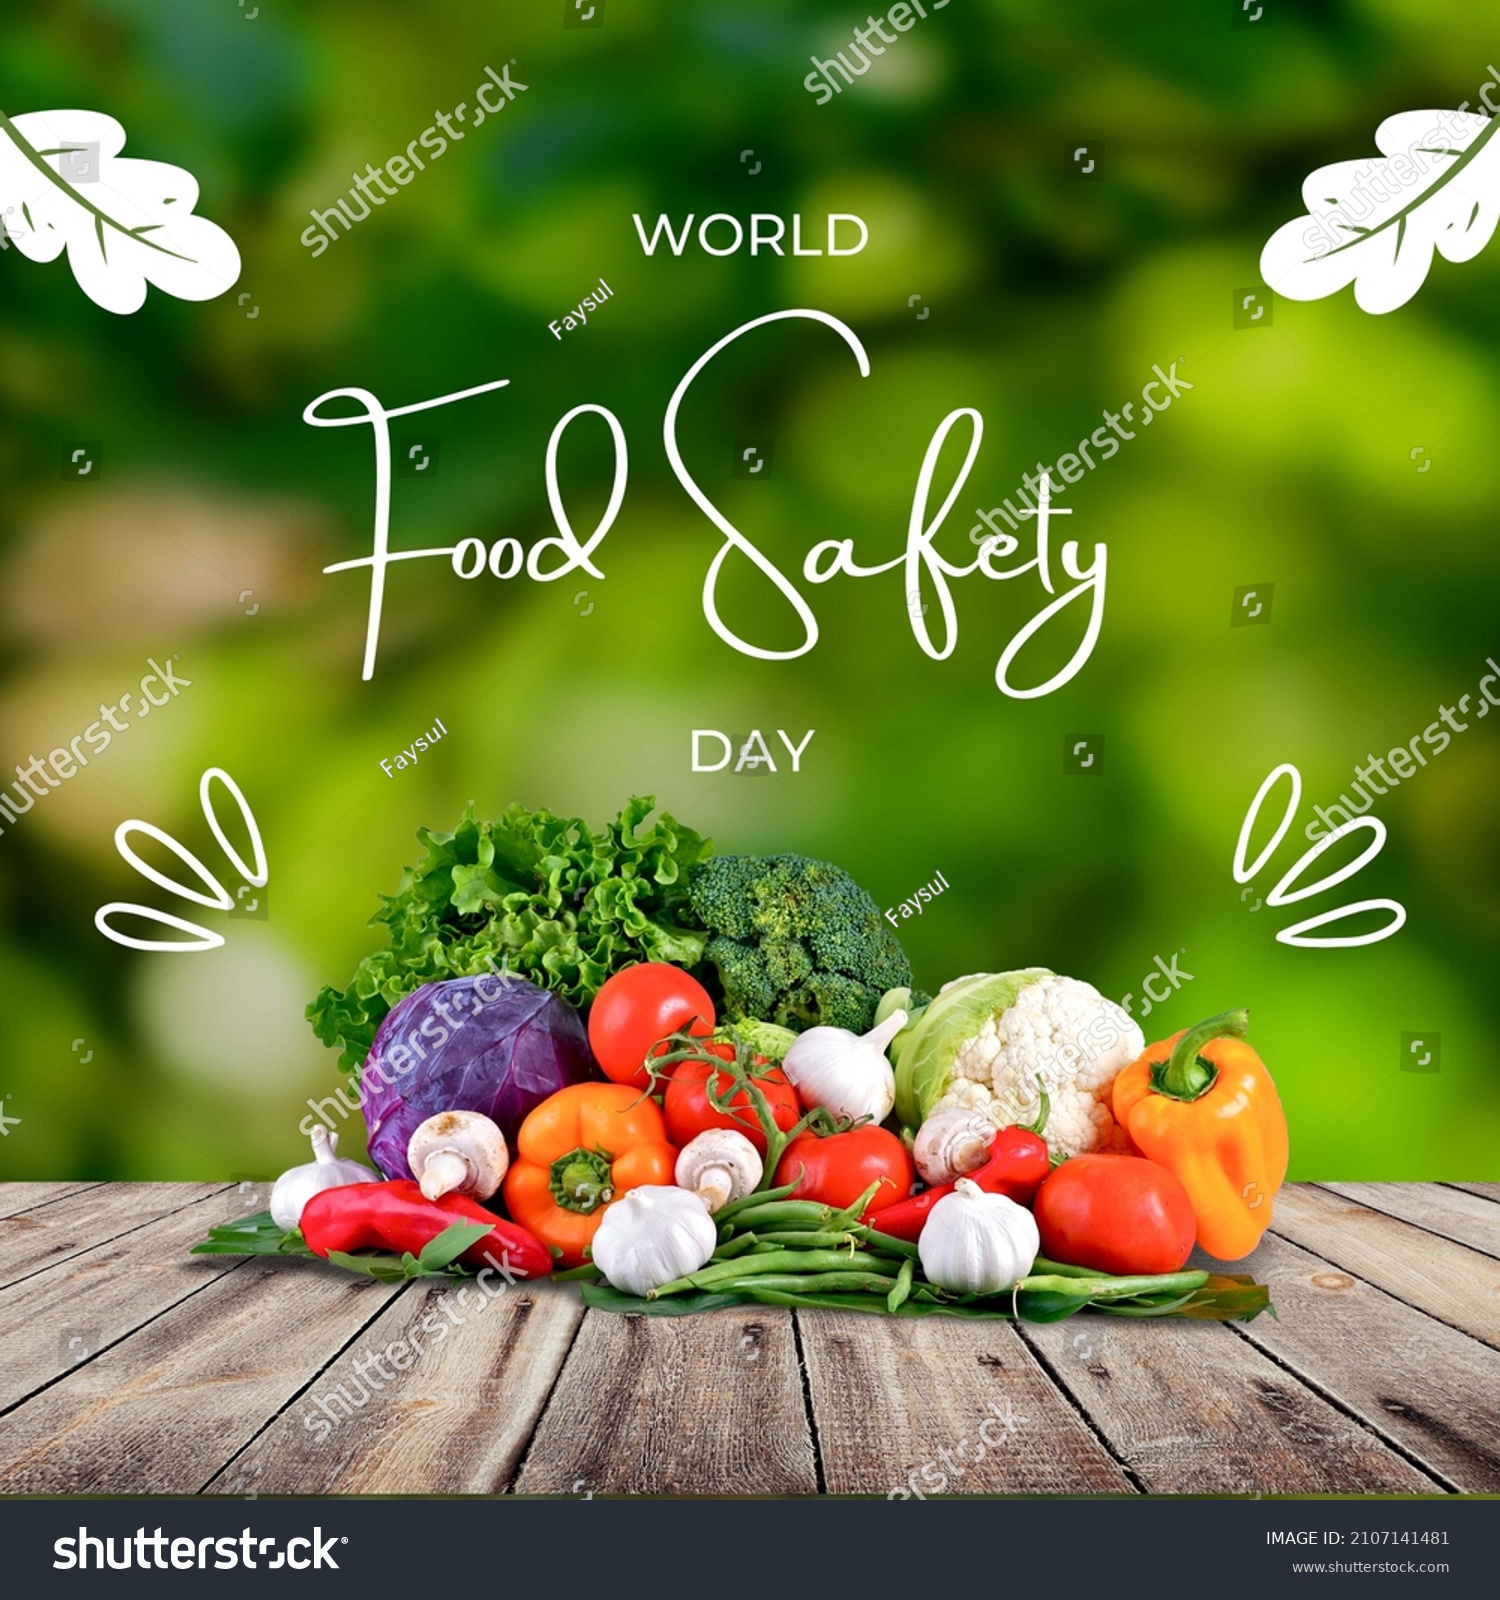 World Food Safety Day Poster #2107141481